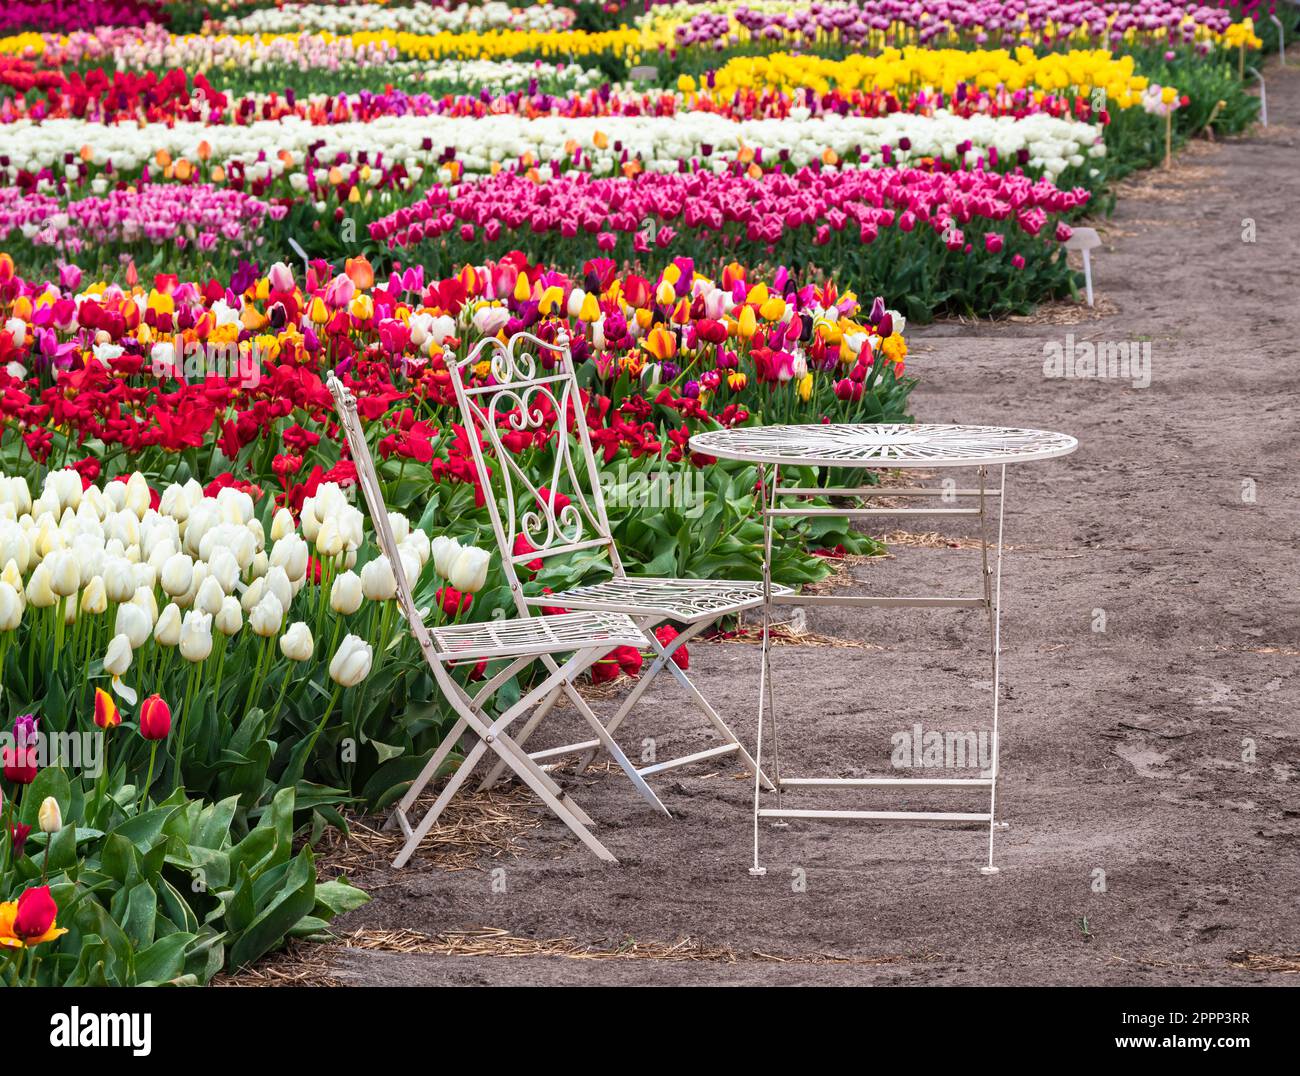 White metal chairs and a table in the field of multicolored blooming tulips near Amsterdam, Holland Stock Photo